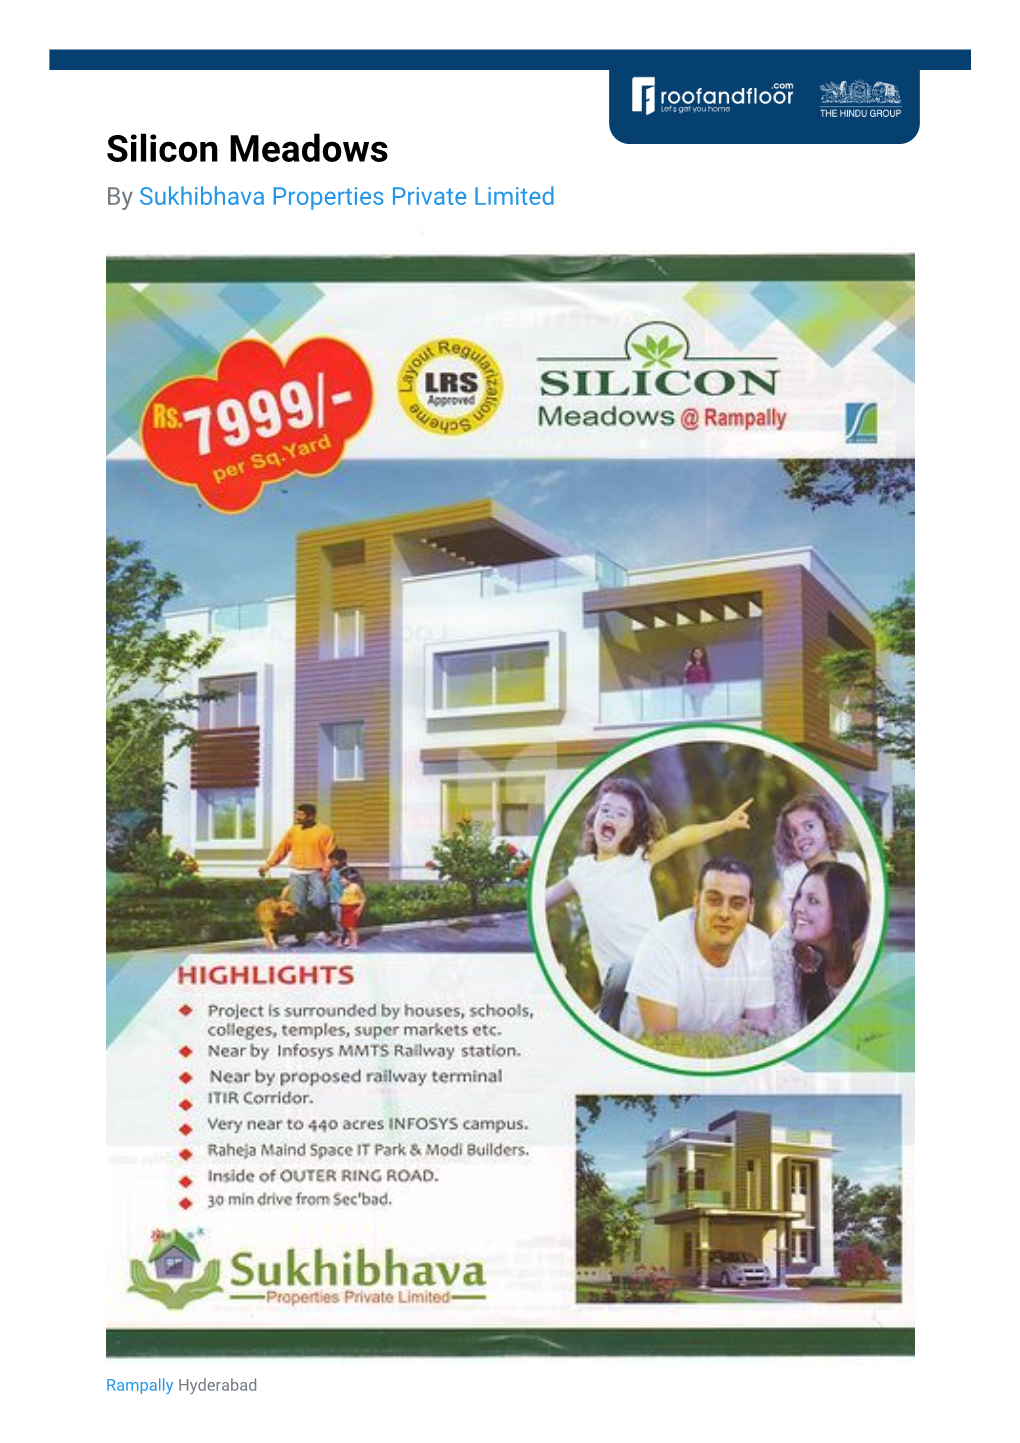 Silicon Meadows by Sukhibhava Properties Private Limited